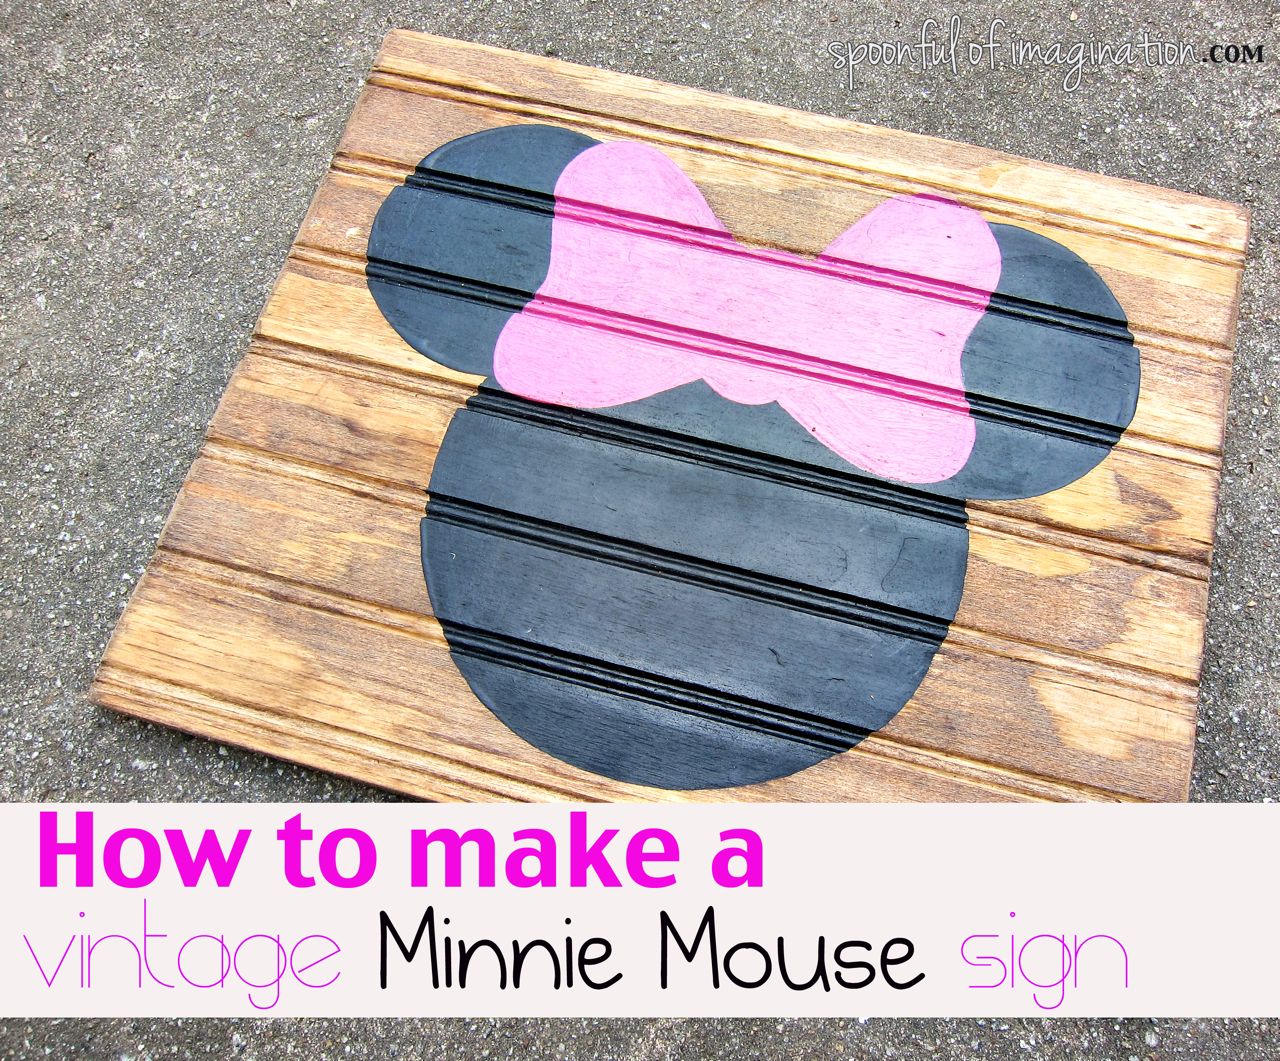 Diy Minnie Mouse Silhouette Spoonful Of Imagination